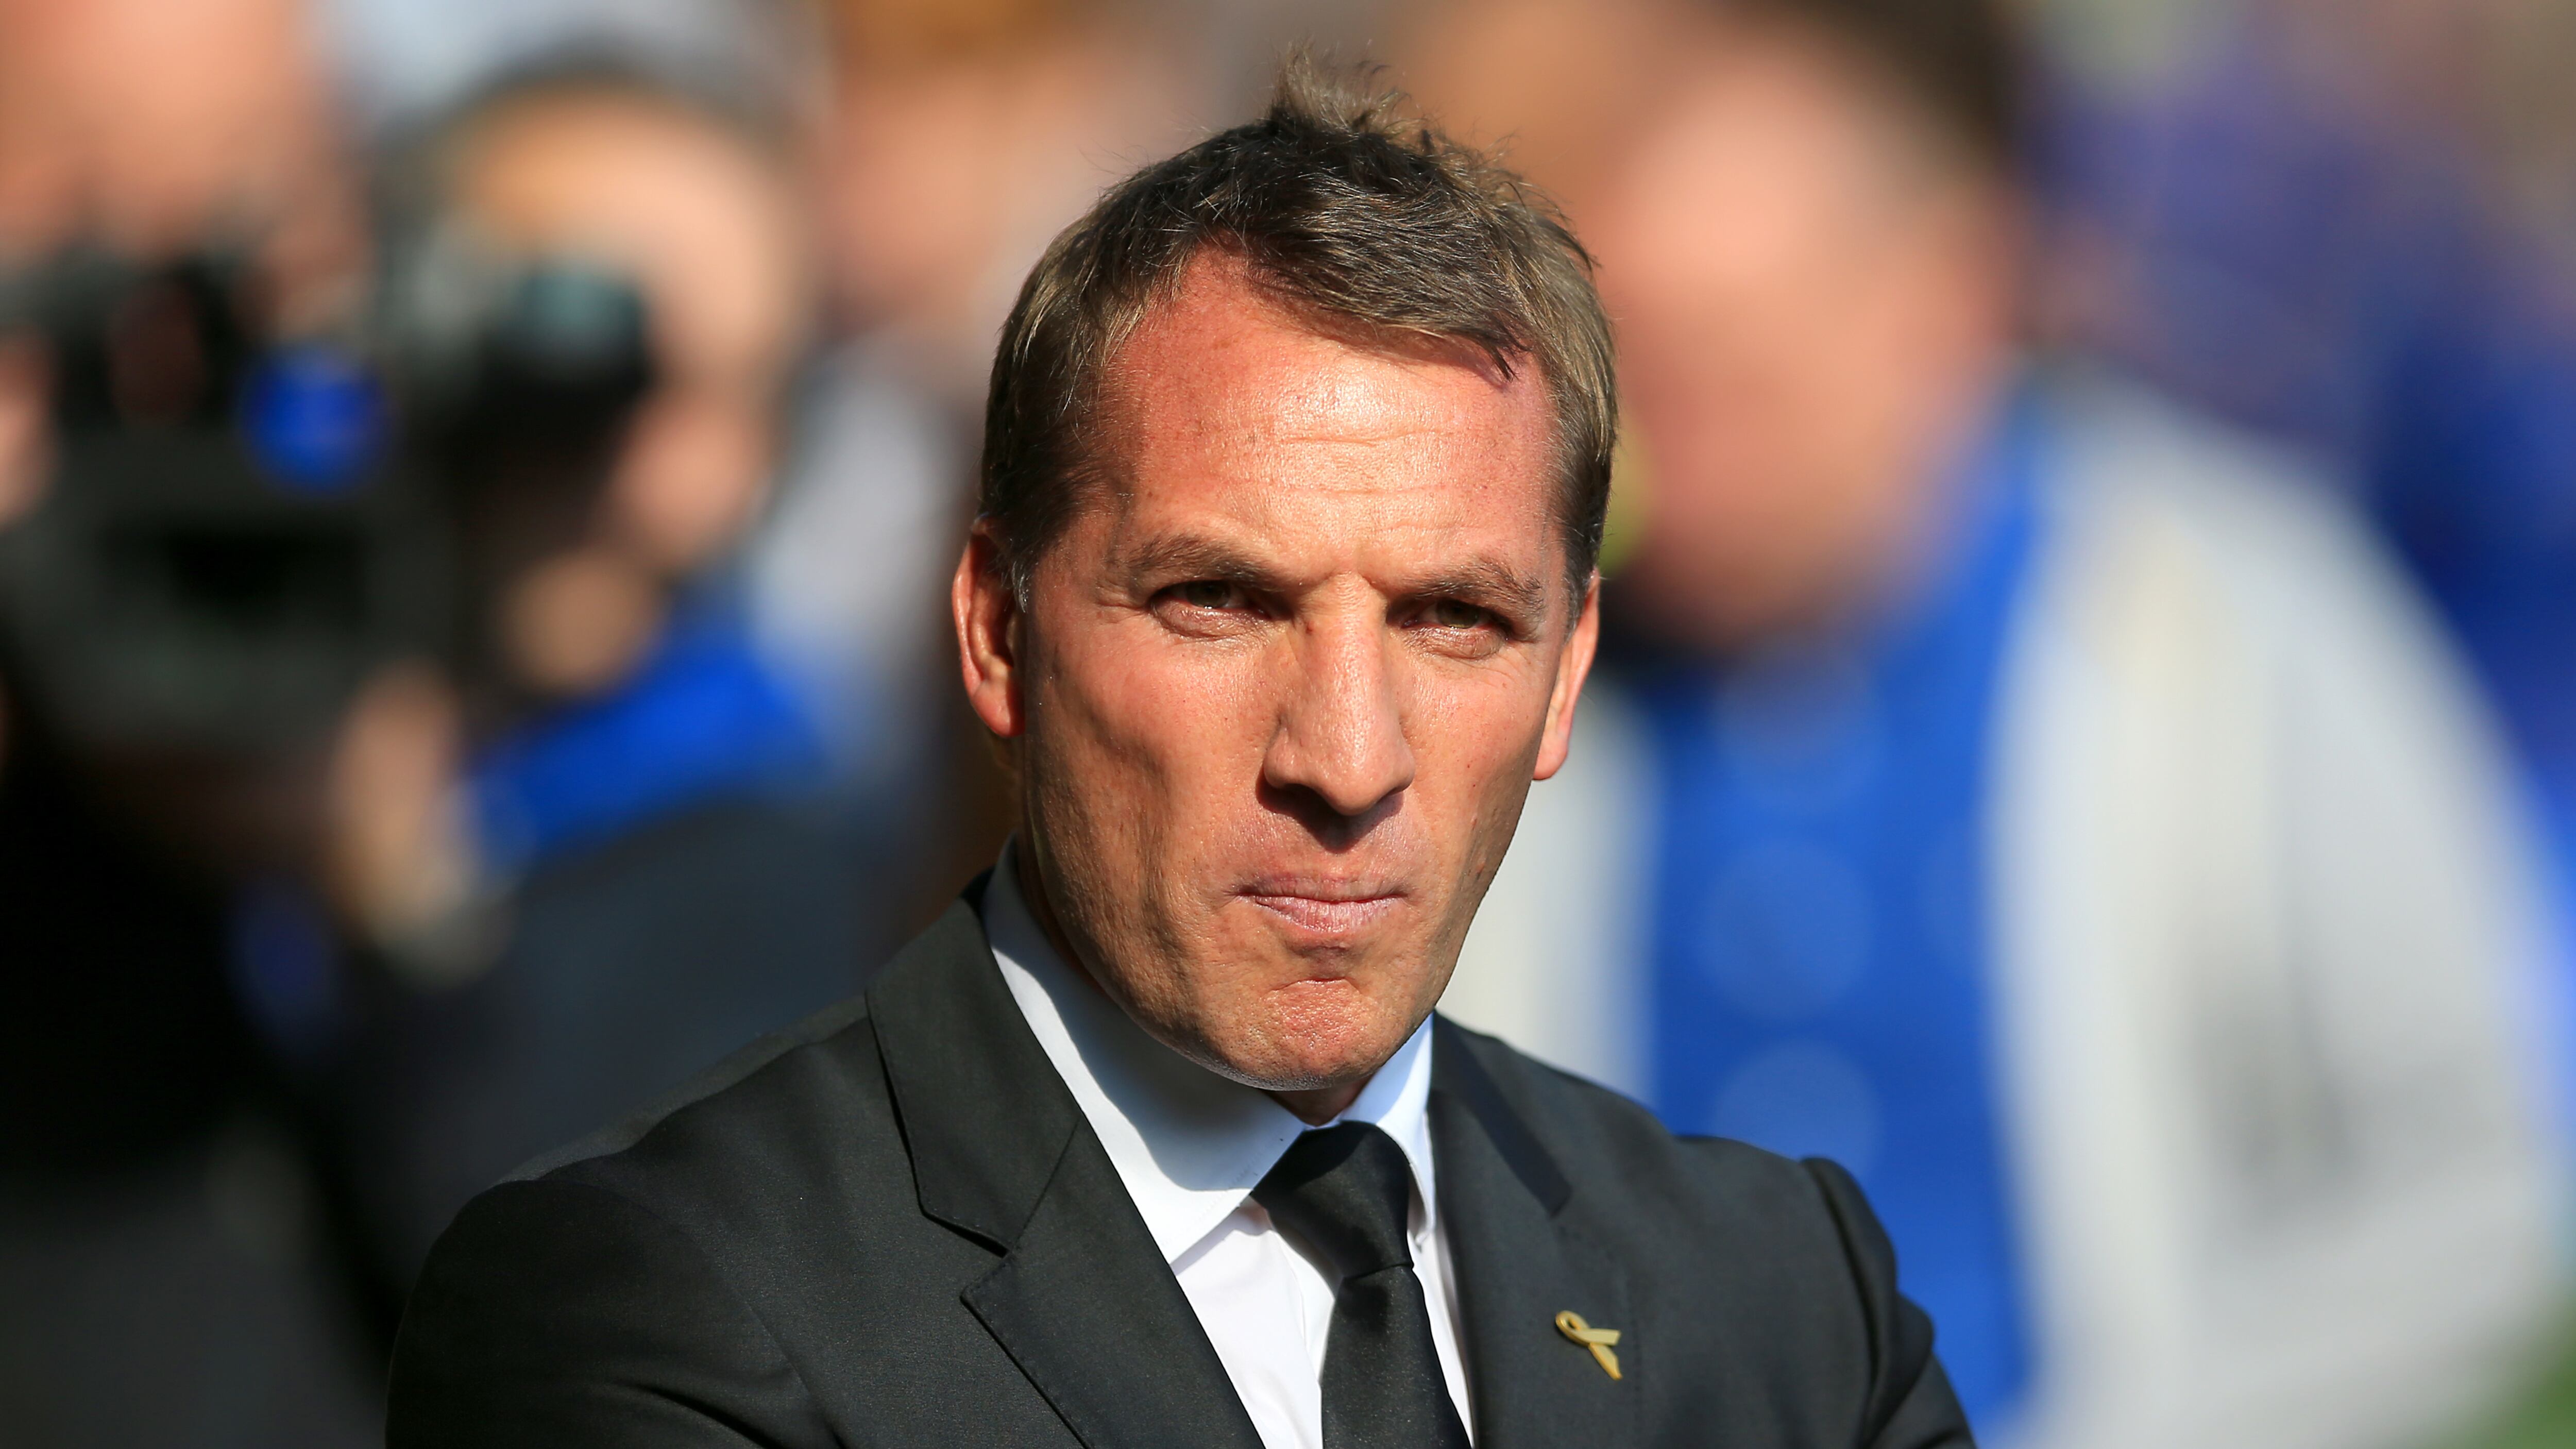 Brendan Rodgers was appointed as Liverpool manager on this day in 2012